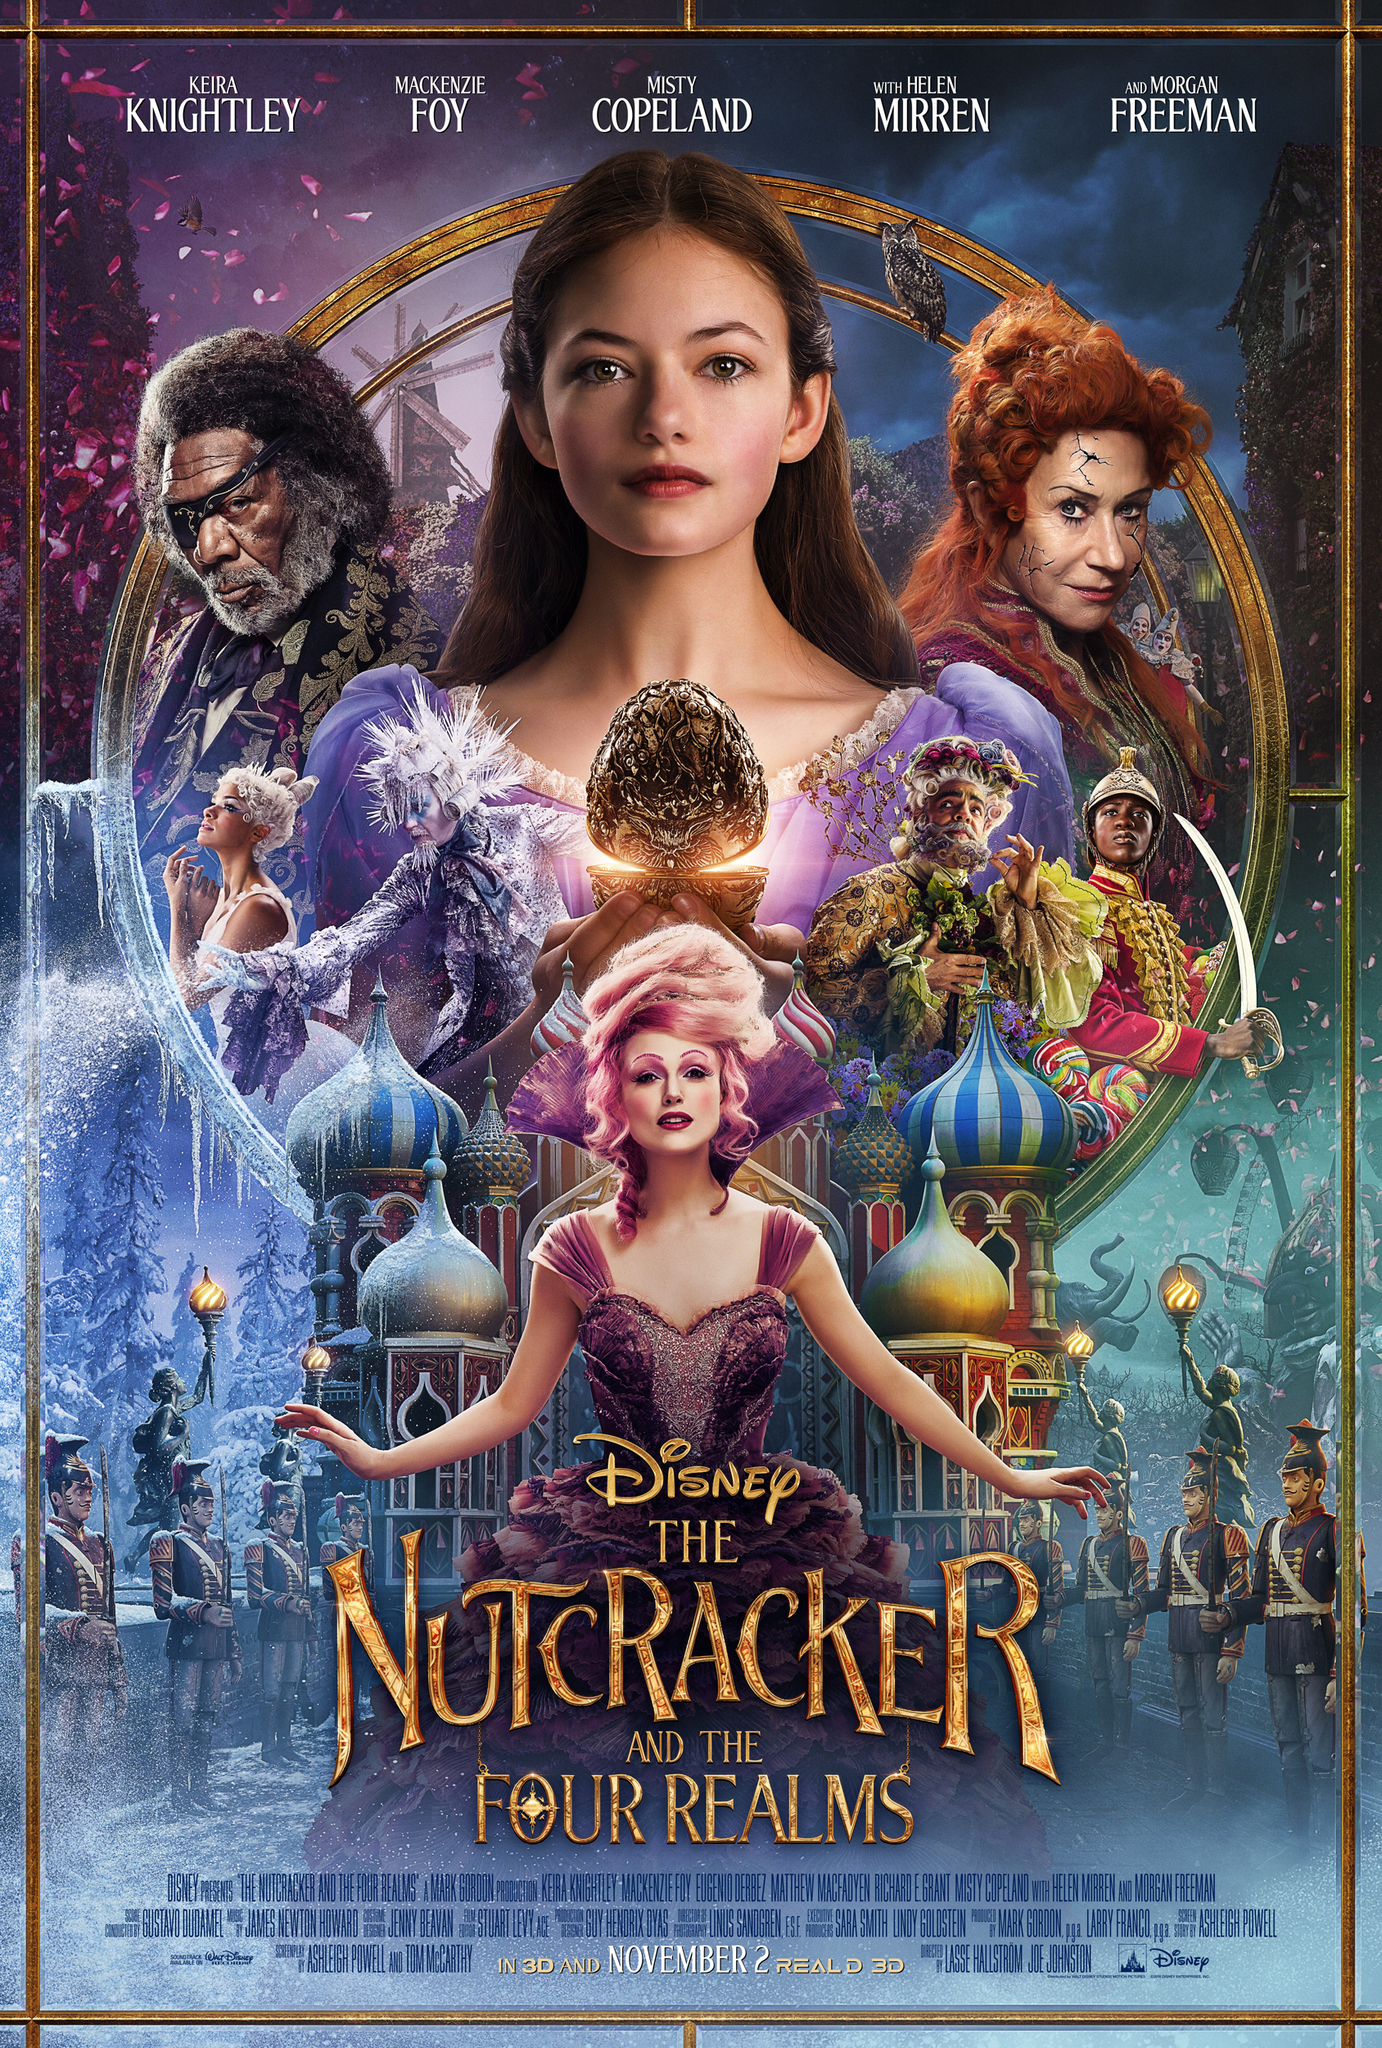 Best Christmas animated movies - The Nutcracker and the Four Realms